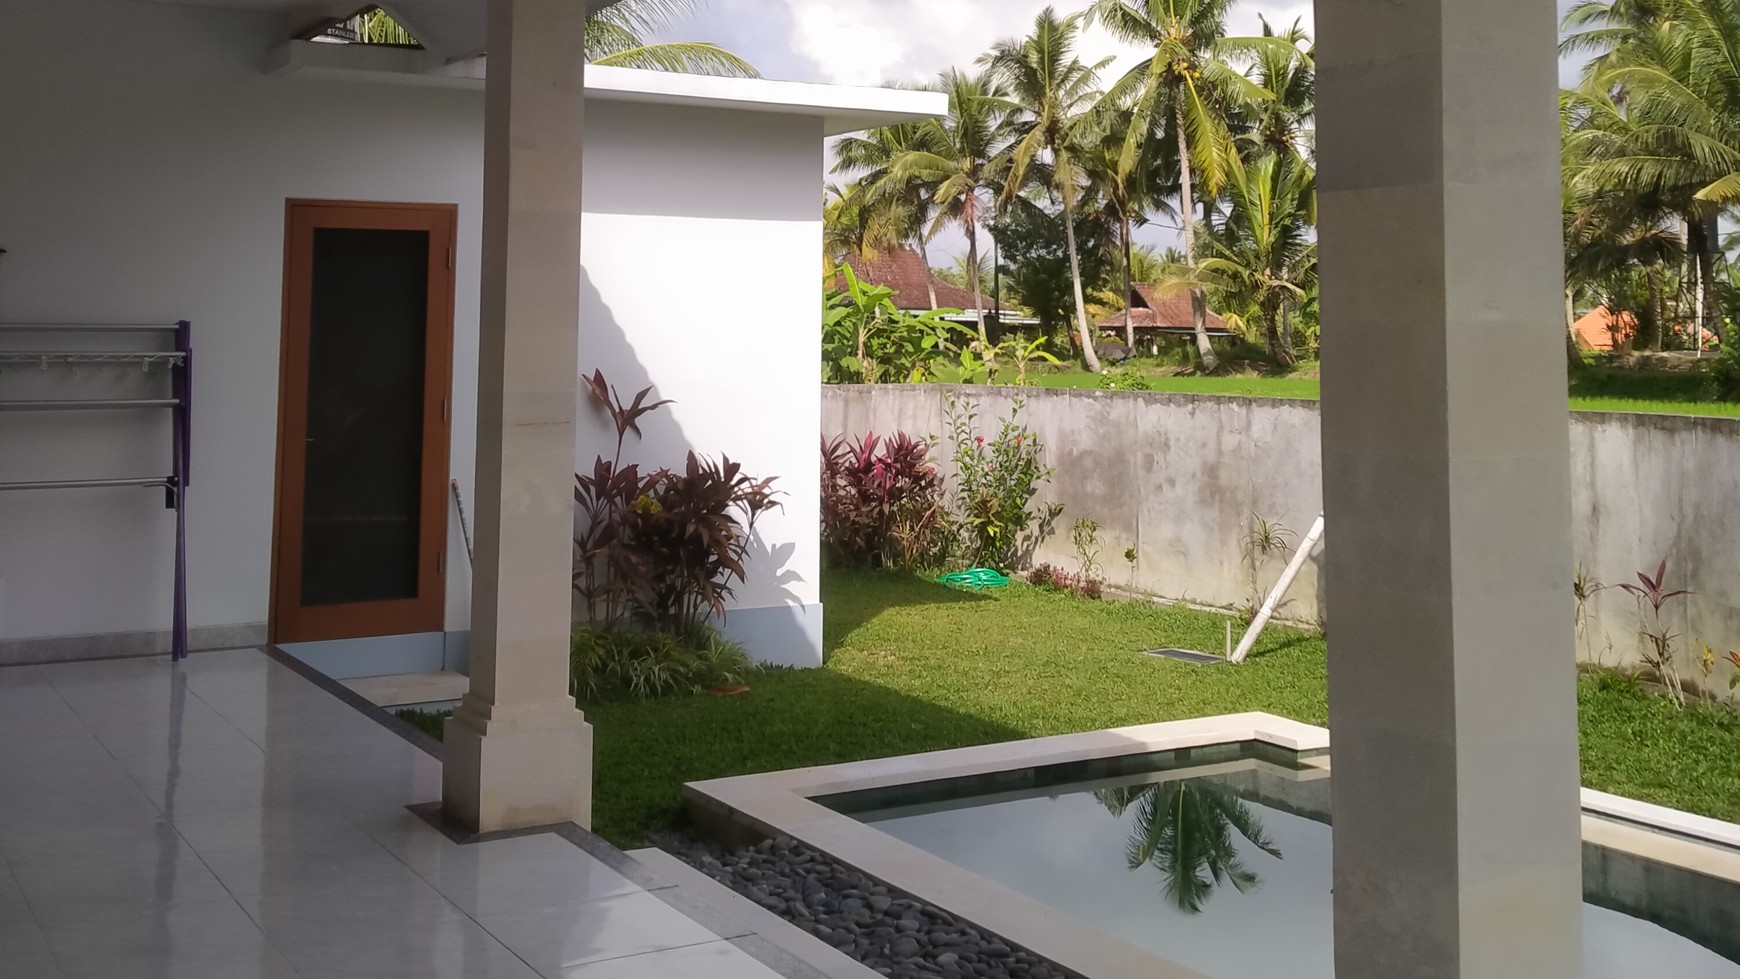 2 Bedroom Leasehold Villa with Rice Field View for Sale Located 5 Minutes from Ubud Center